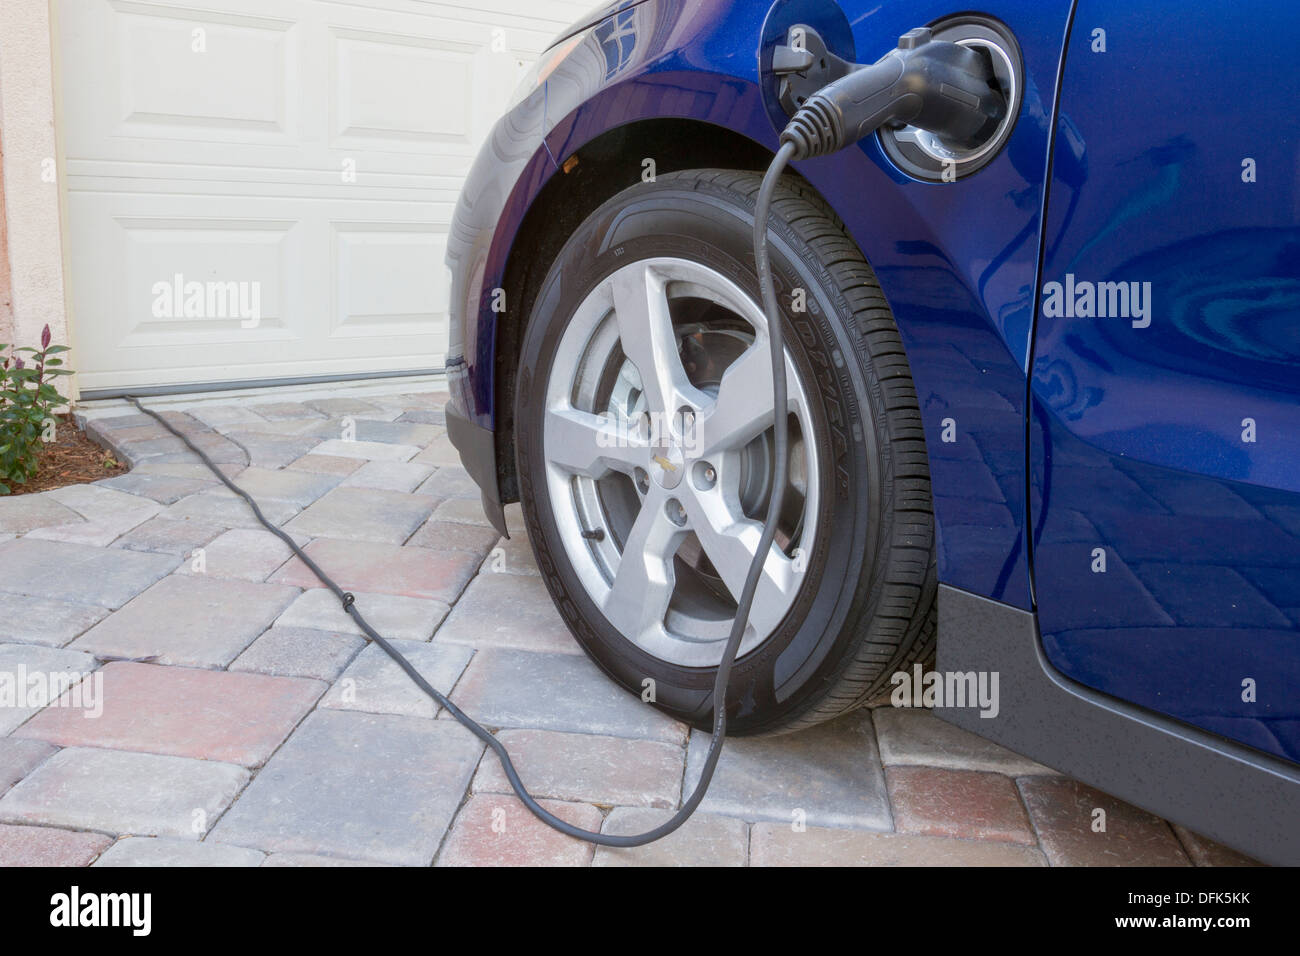 Plug-in hybrid electric car with connector plugged in and charging at home in a driveway Stock Photo